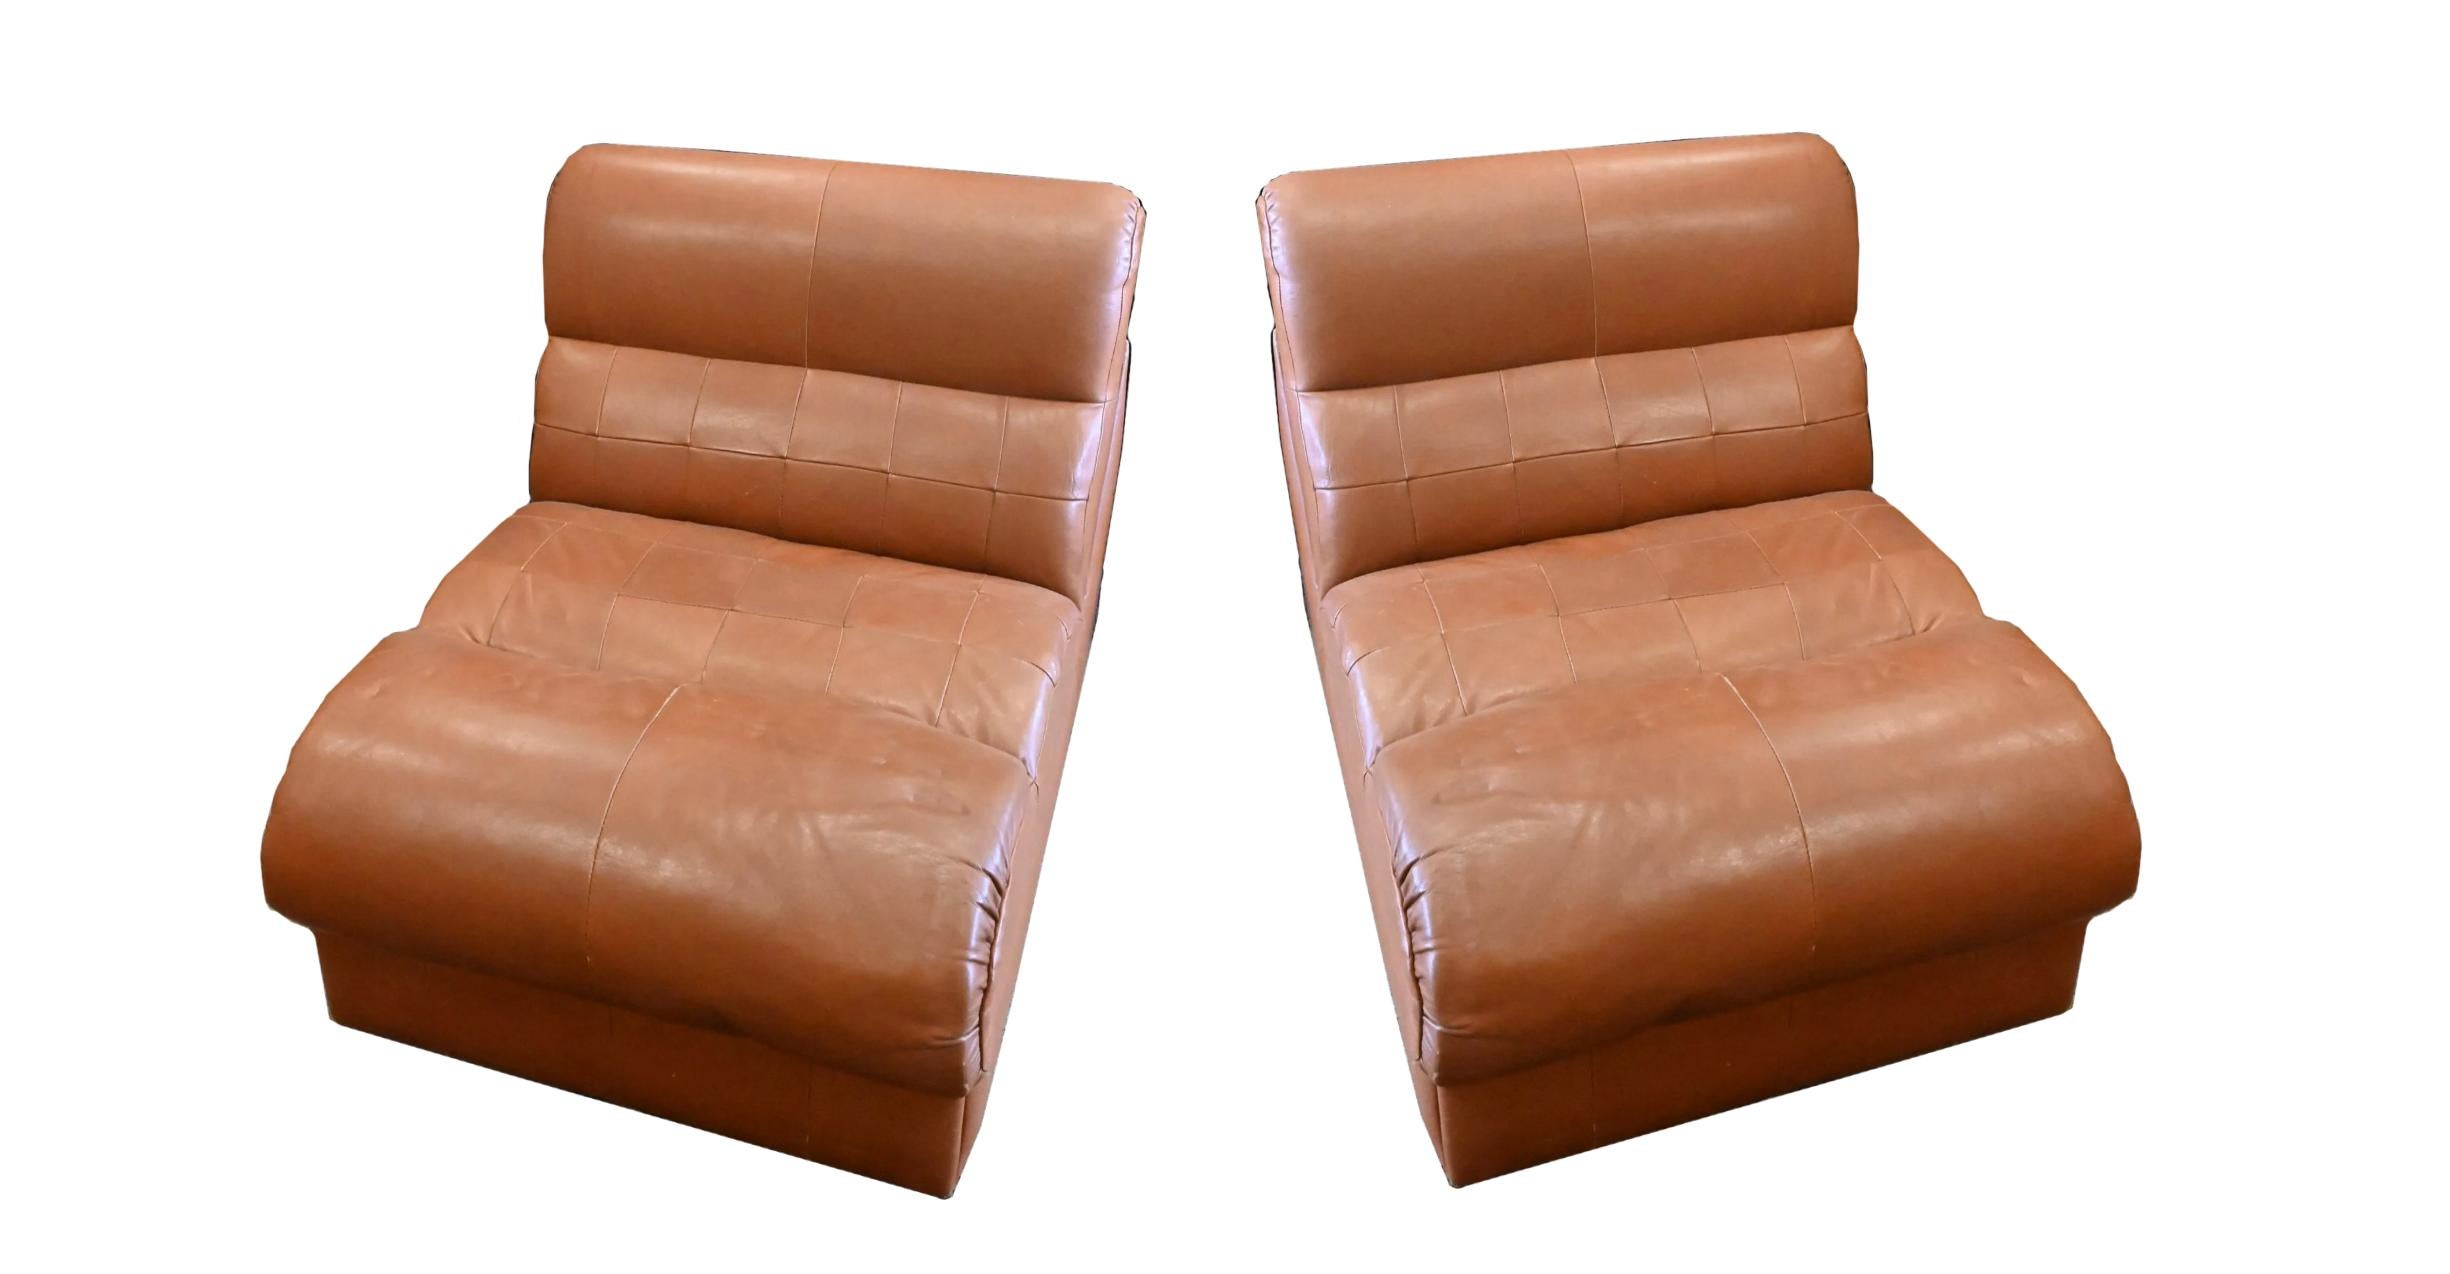 Pair of Percival Lafer midcentury Low Leather Patchwork Slipper Lounge Chairs. Thick soft tan patchwork leather - modular design these (2) units can be used separated or pushed together. Work as great lounge chairs possibly part of a larger Modular